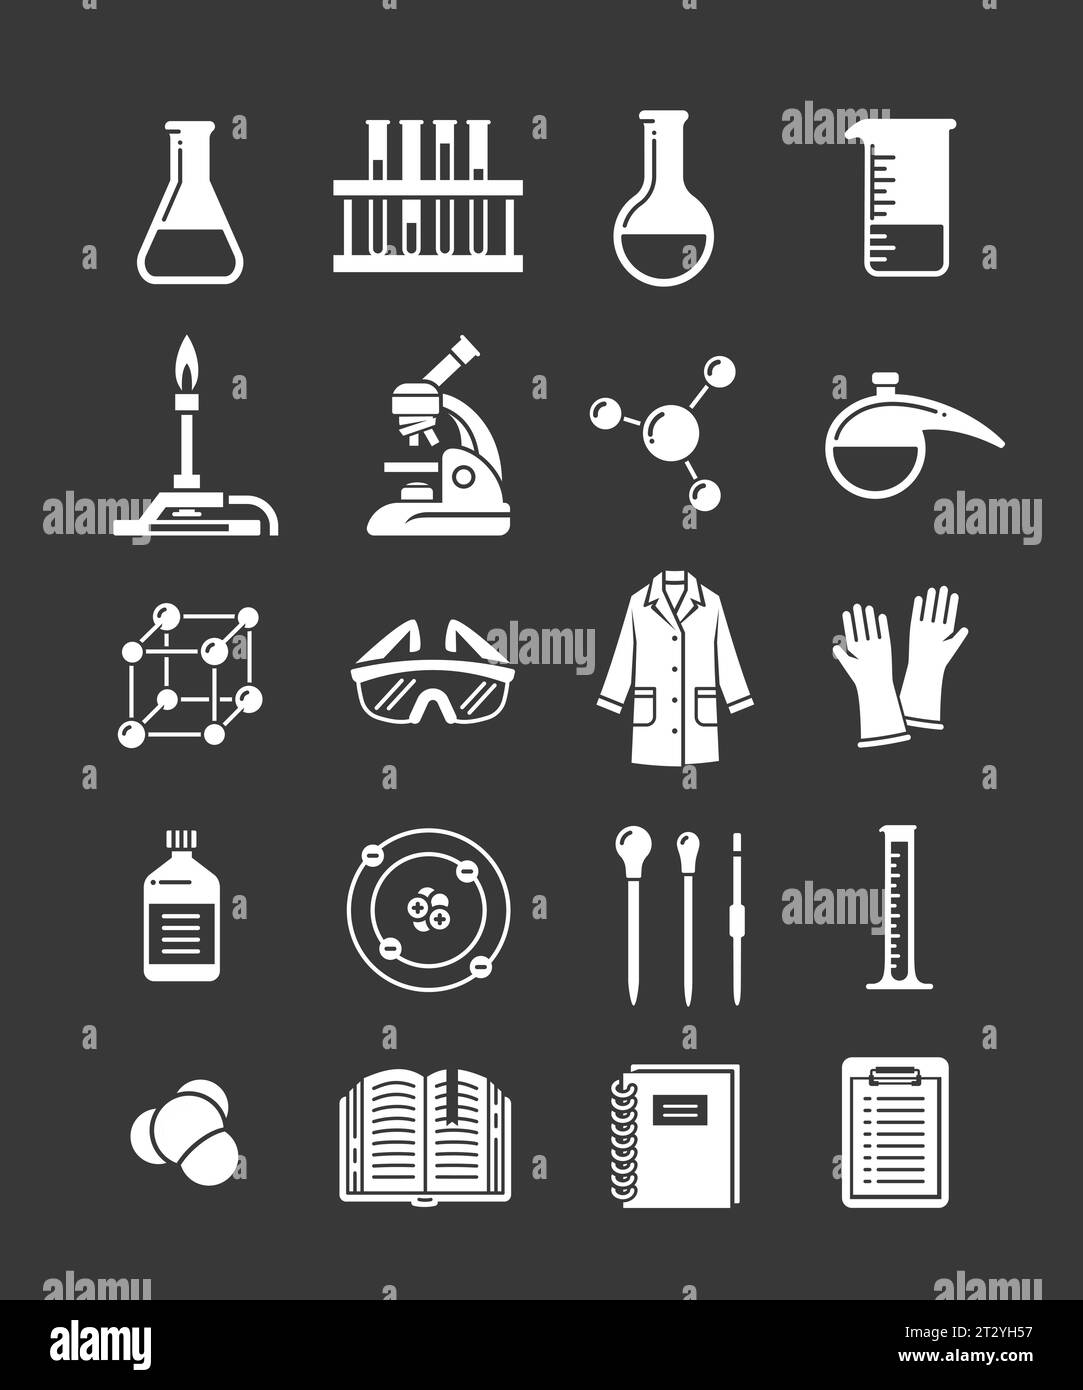 Chemistry lab icons. Chemical laboratory equipment symbols. Chemistry class, school subject glyphs. Simple white silhouette pictograms of microscope, Stock Vector